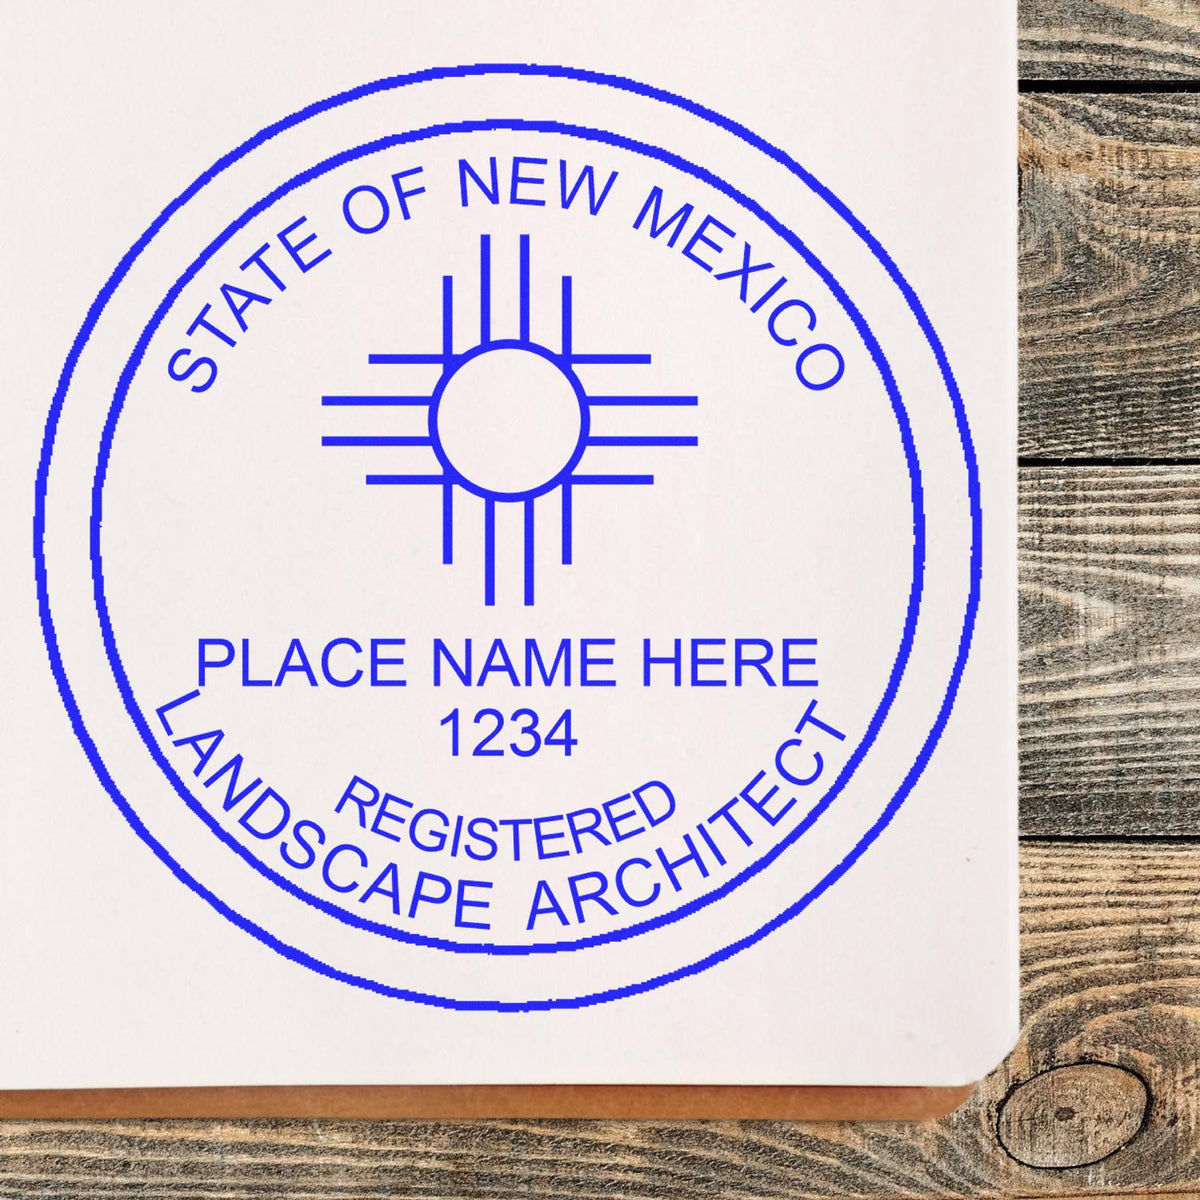 Another Example of a stamped impression of the Slim Pre-Inked New Mexico Landscape Architect Seal Stamp on a piece of office paper.